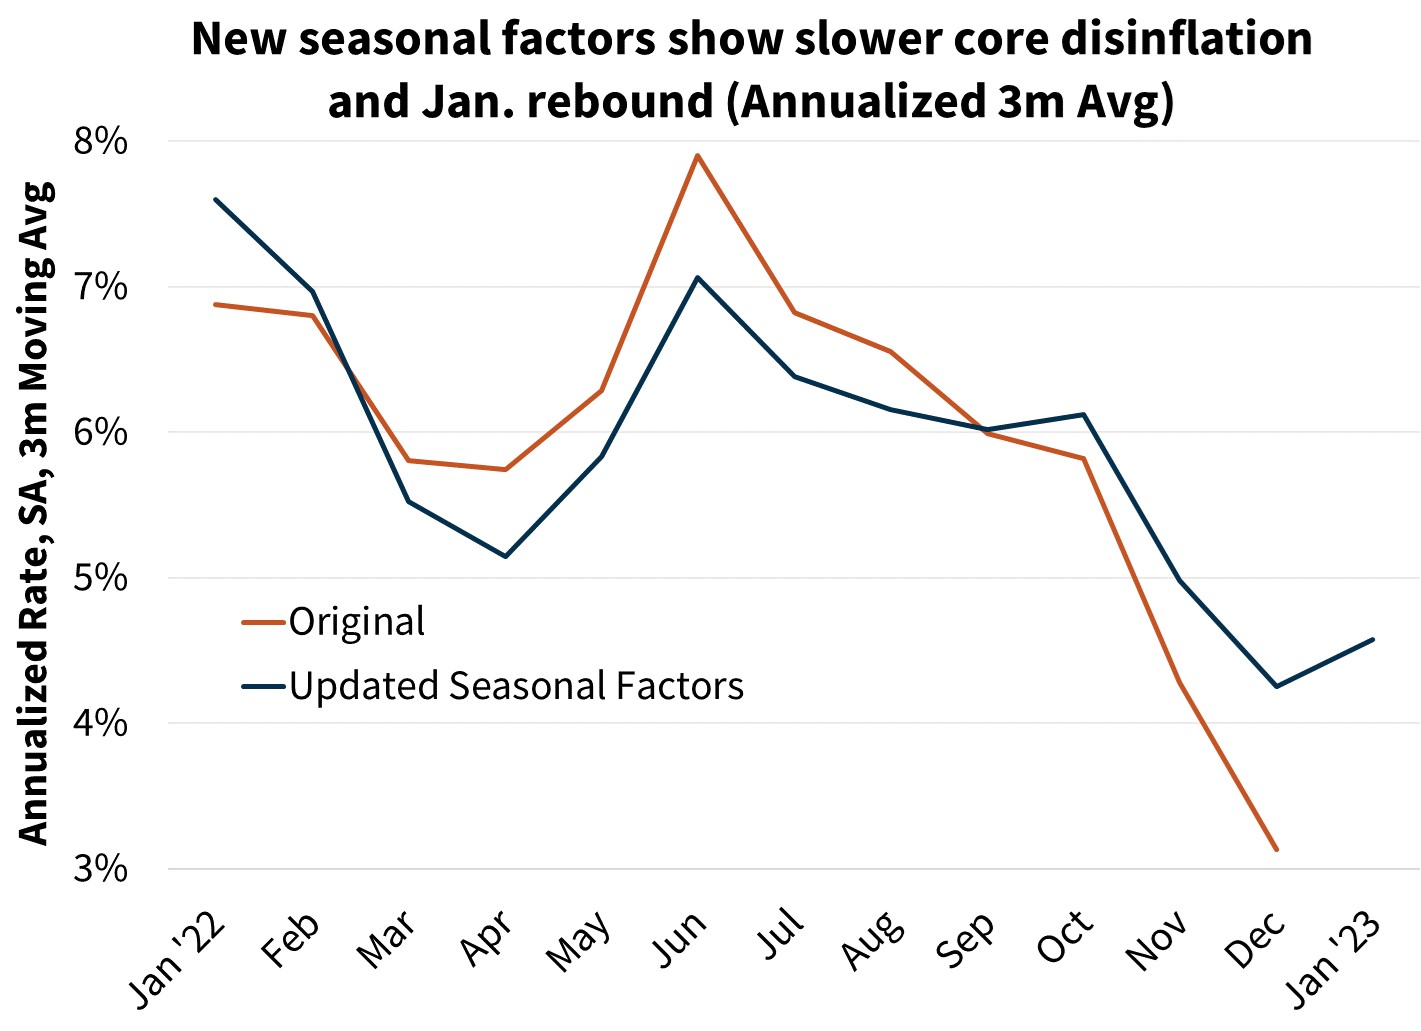  New seasonal factors show slower core disinflation and Jan. rebound (Annualized 3m Avg) 